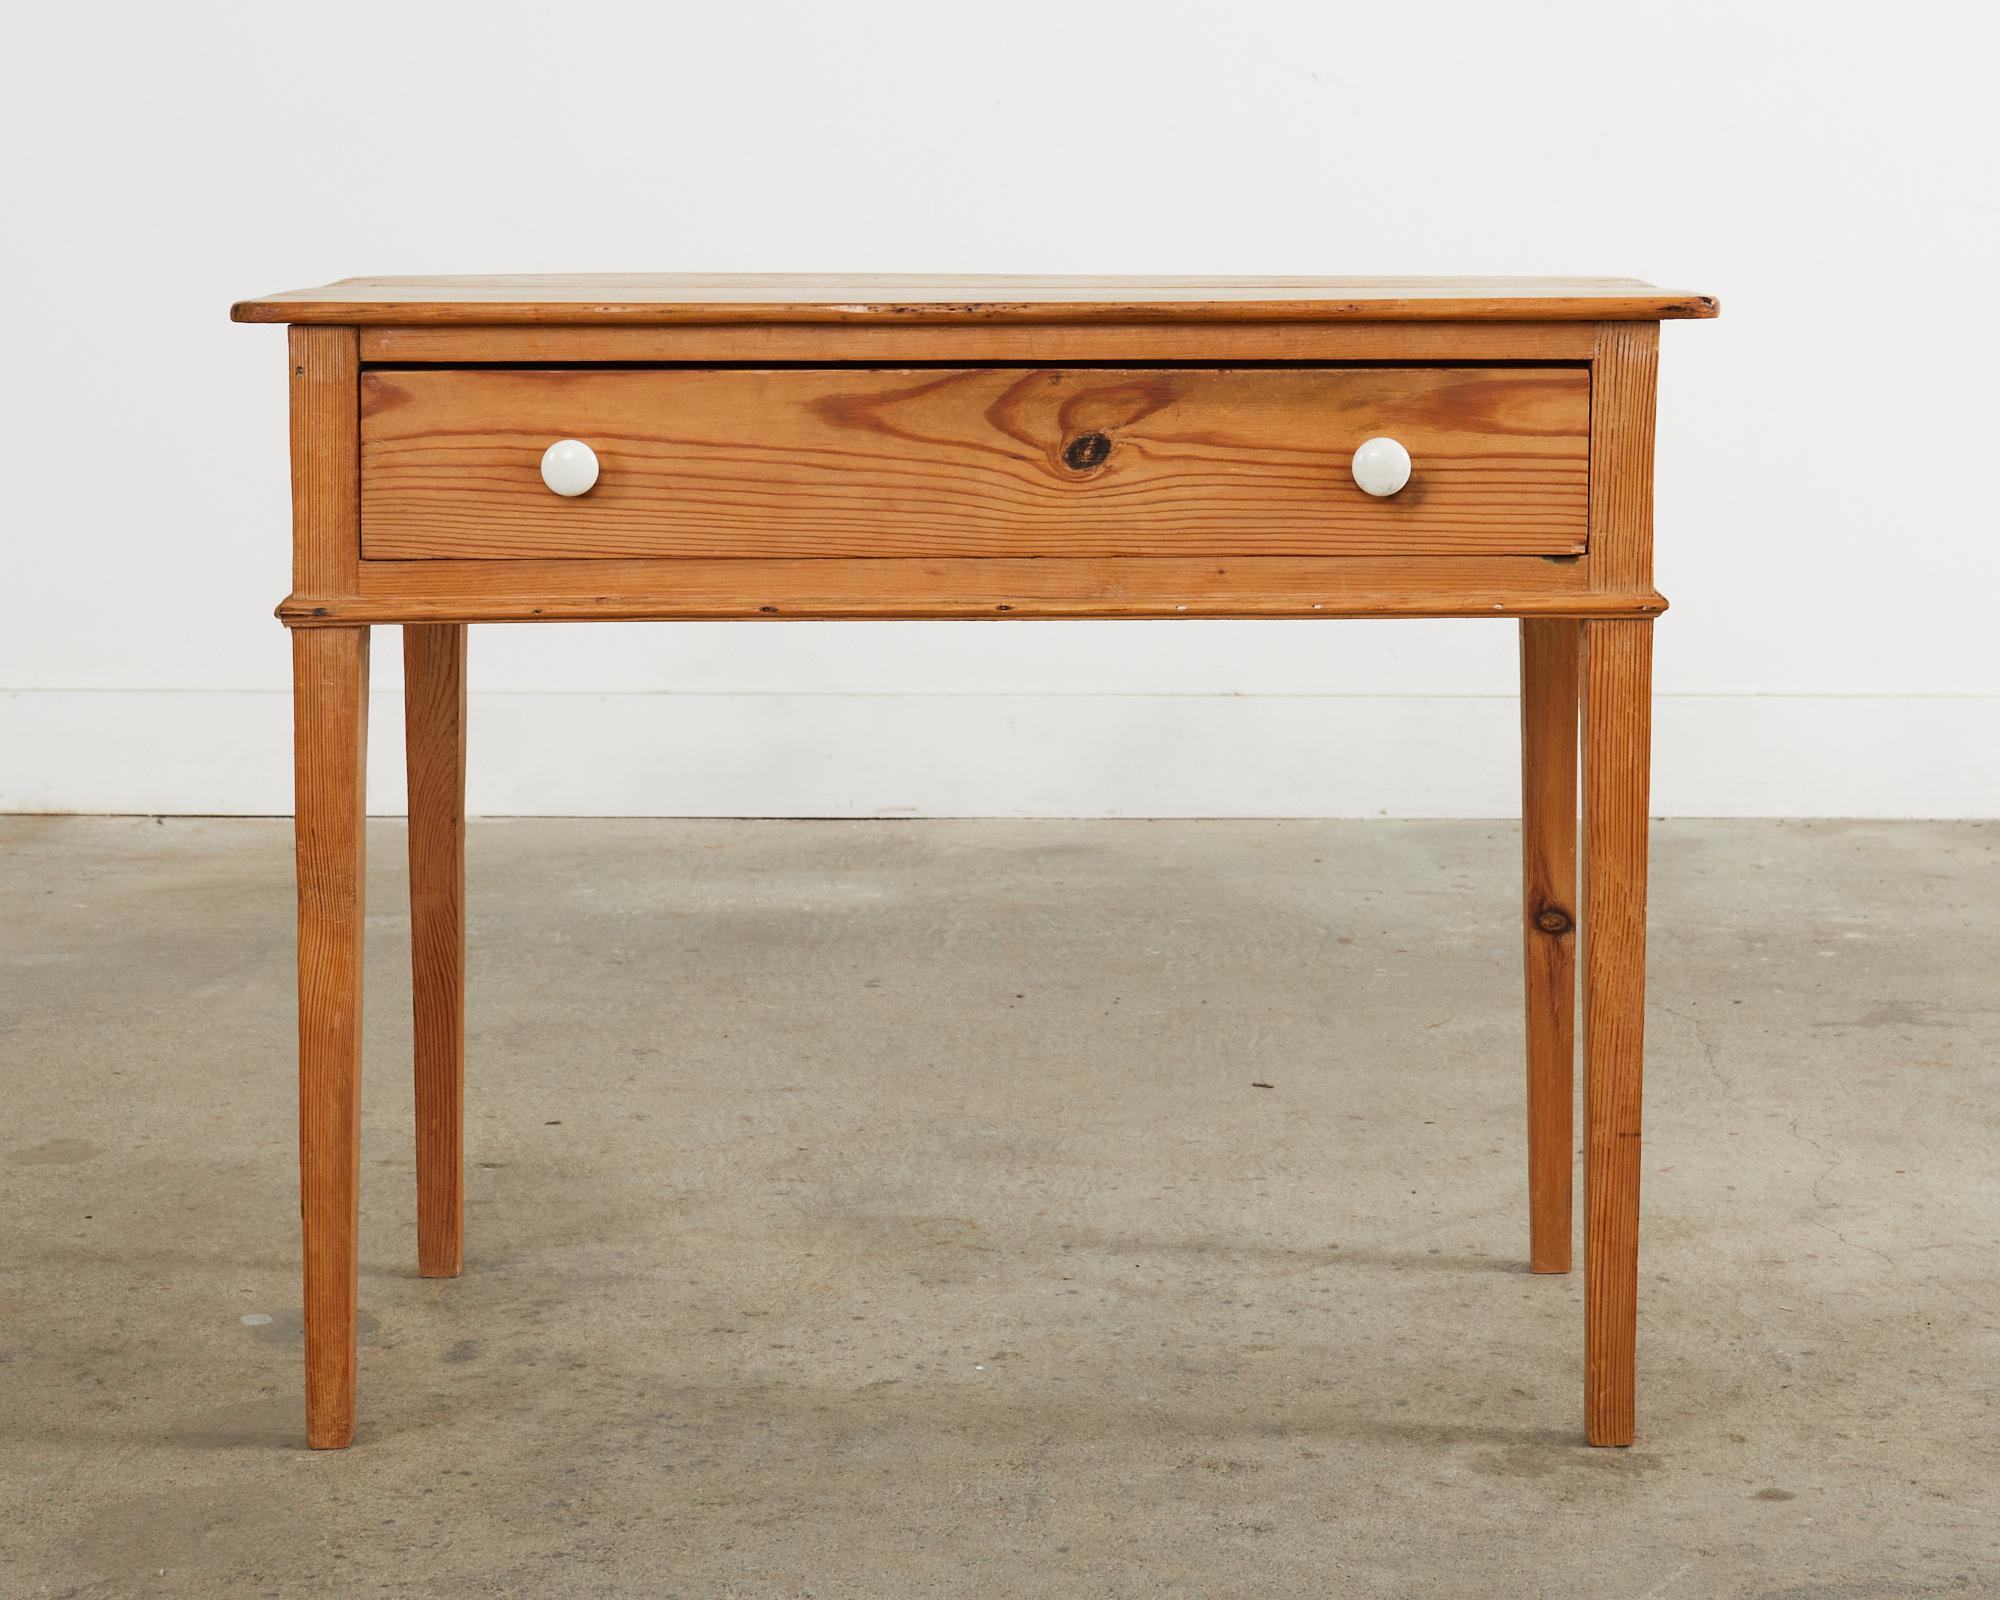 Hand-Crafted Rustic Country English Stripped Pine Console Table For Sale